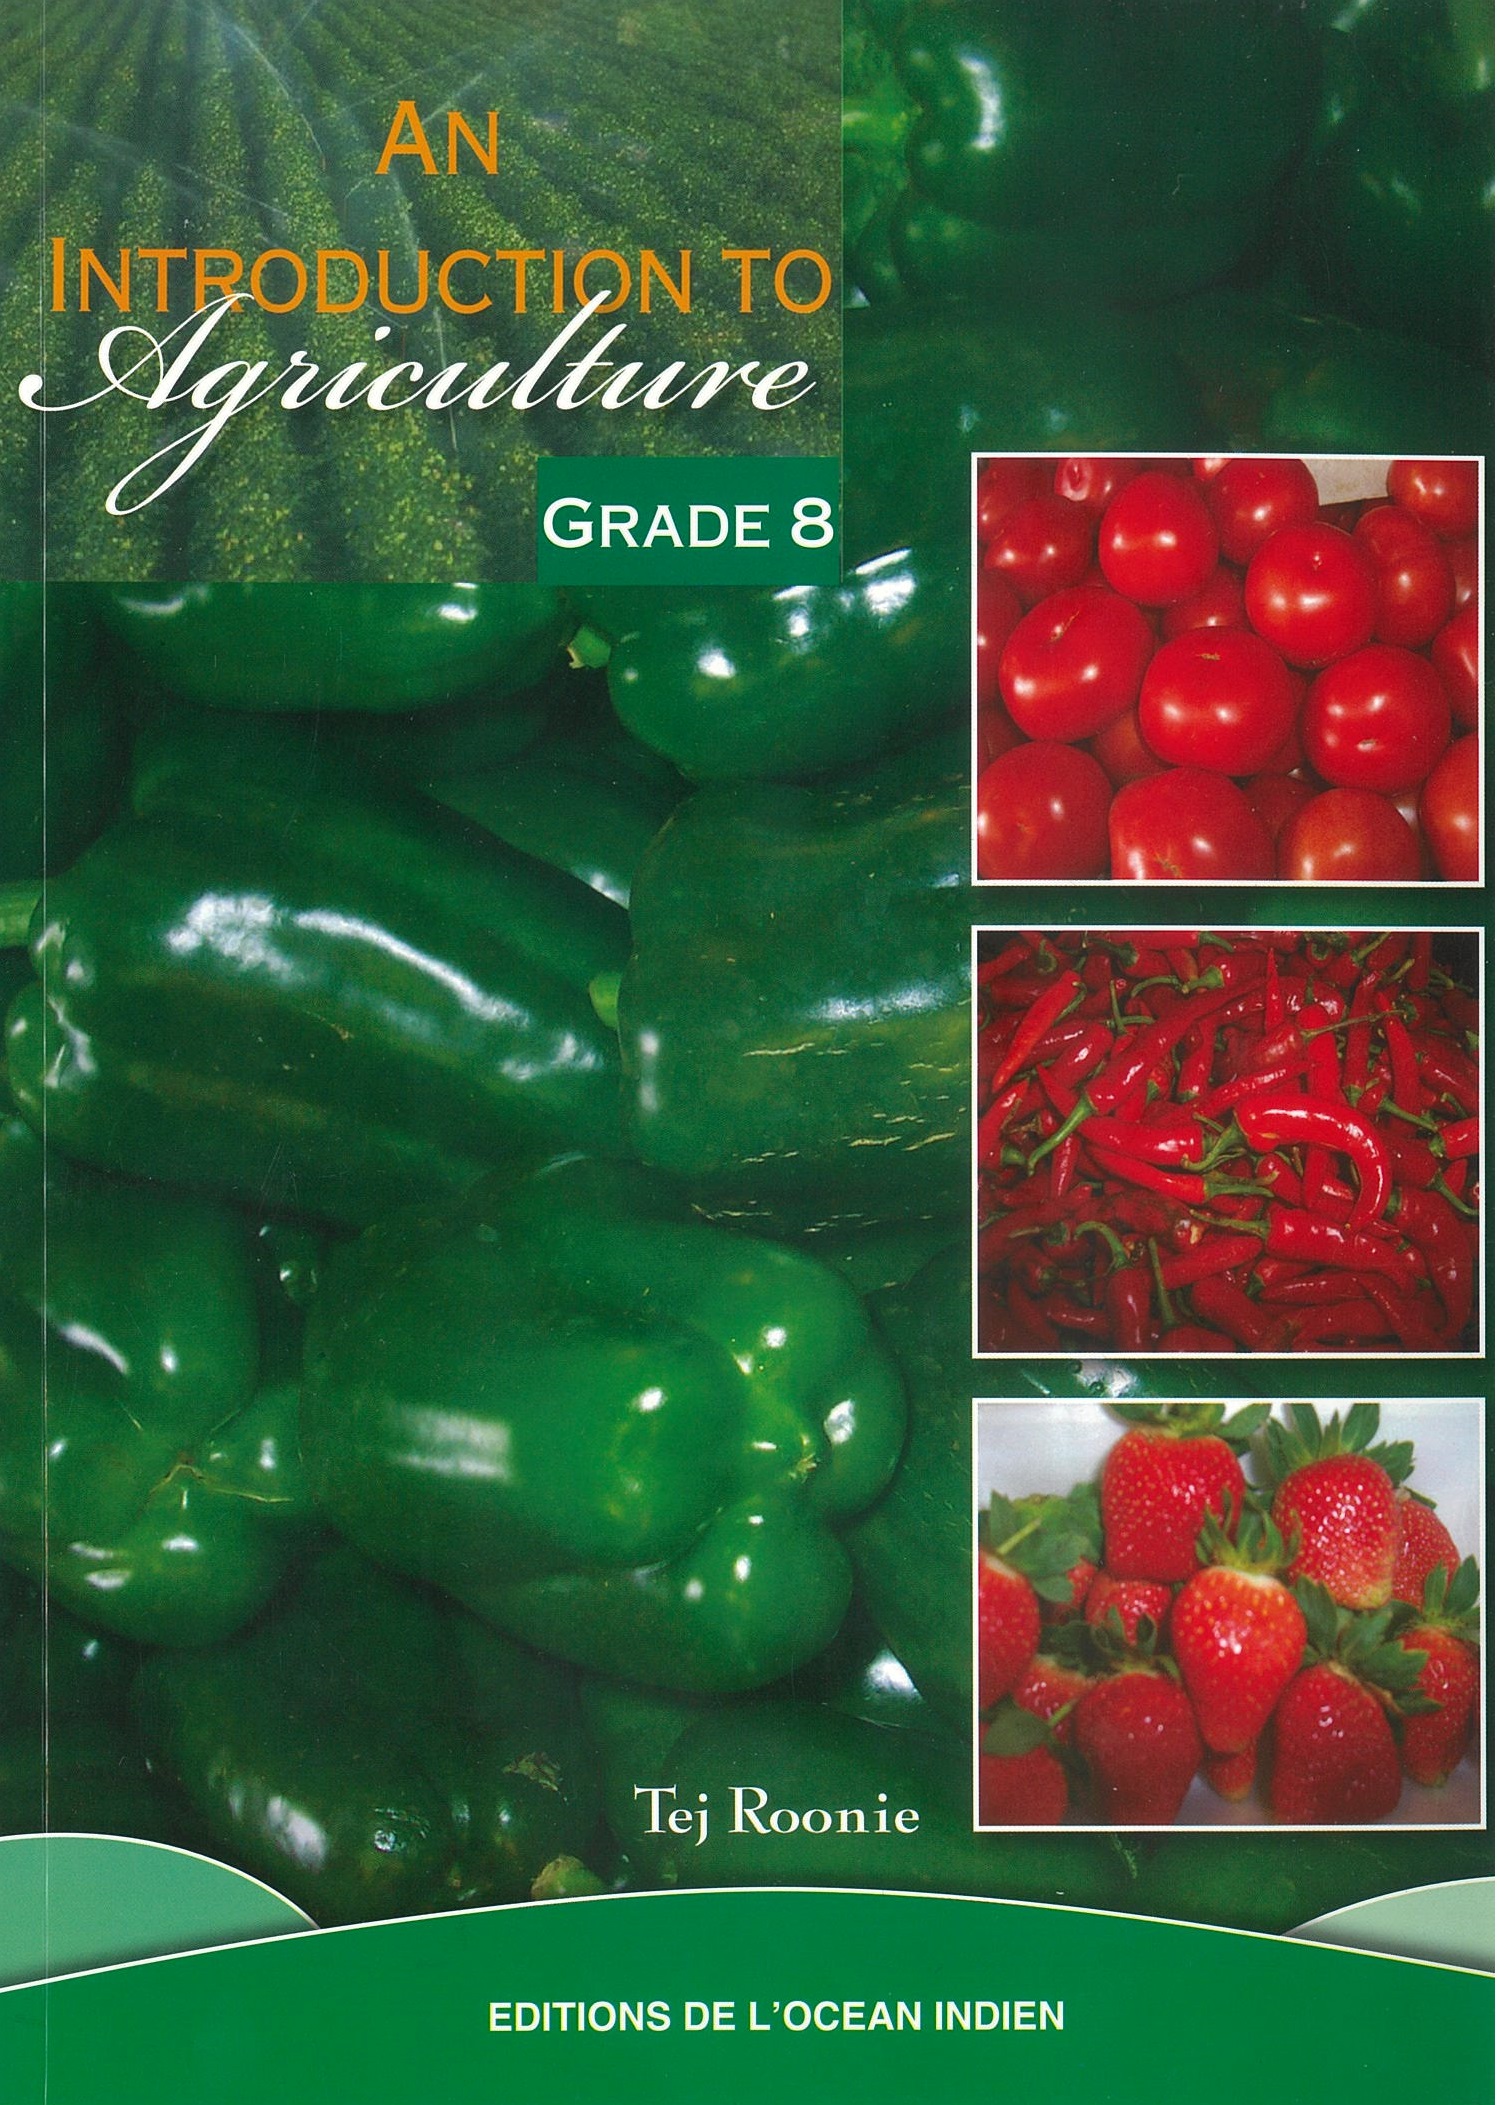 AN INTRODUCTION TO AGRICULTURE BOOK 2 - ROONIE